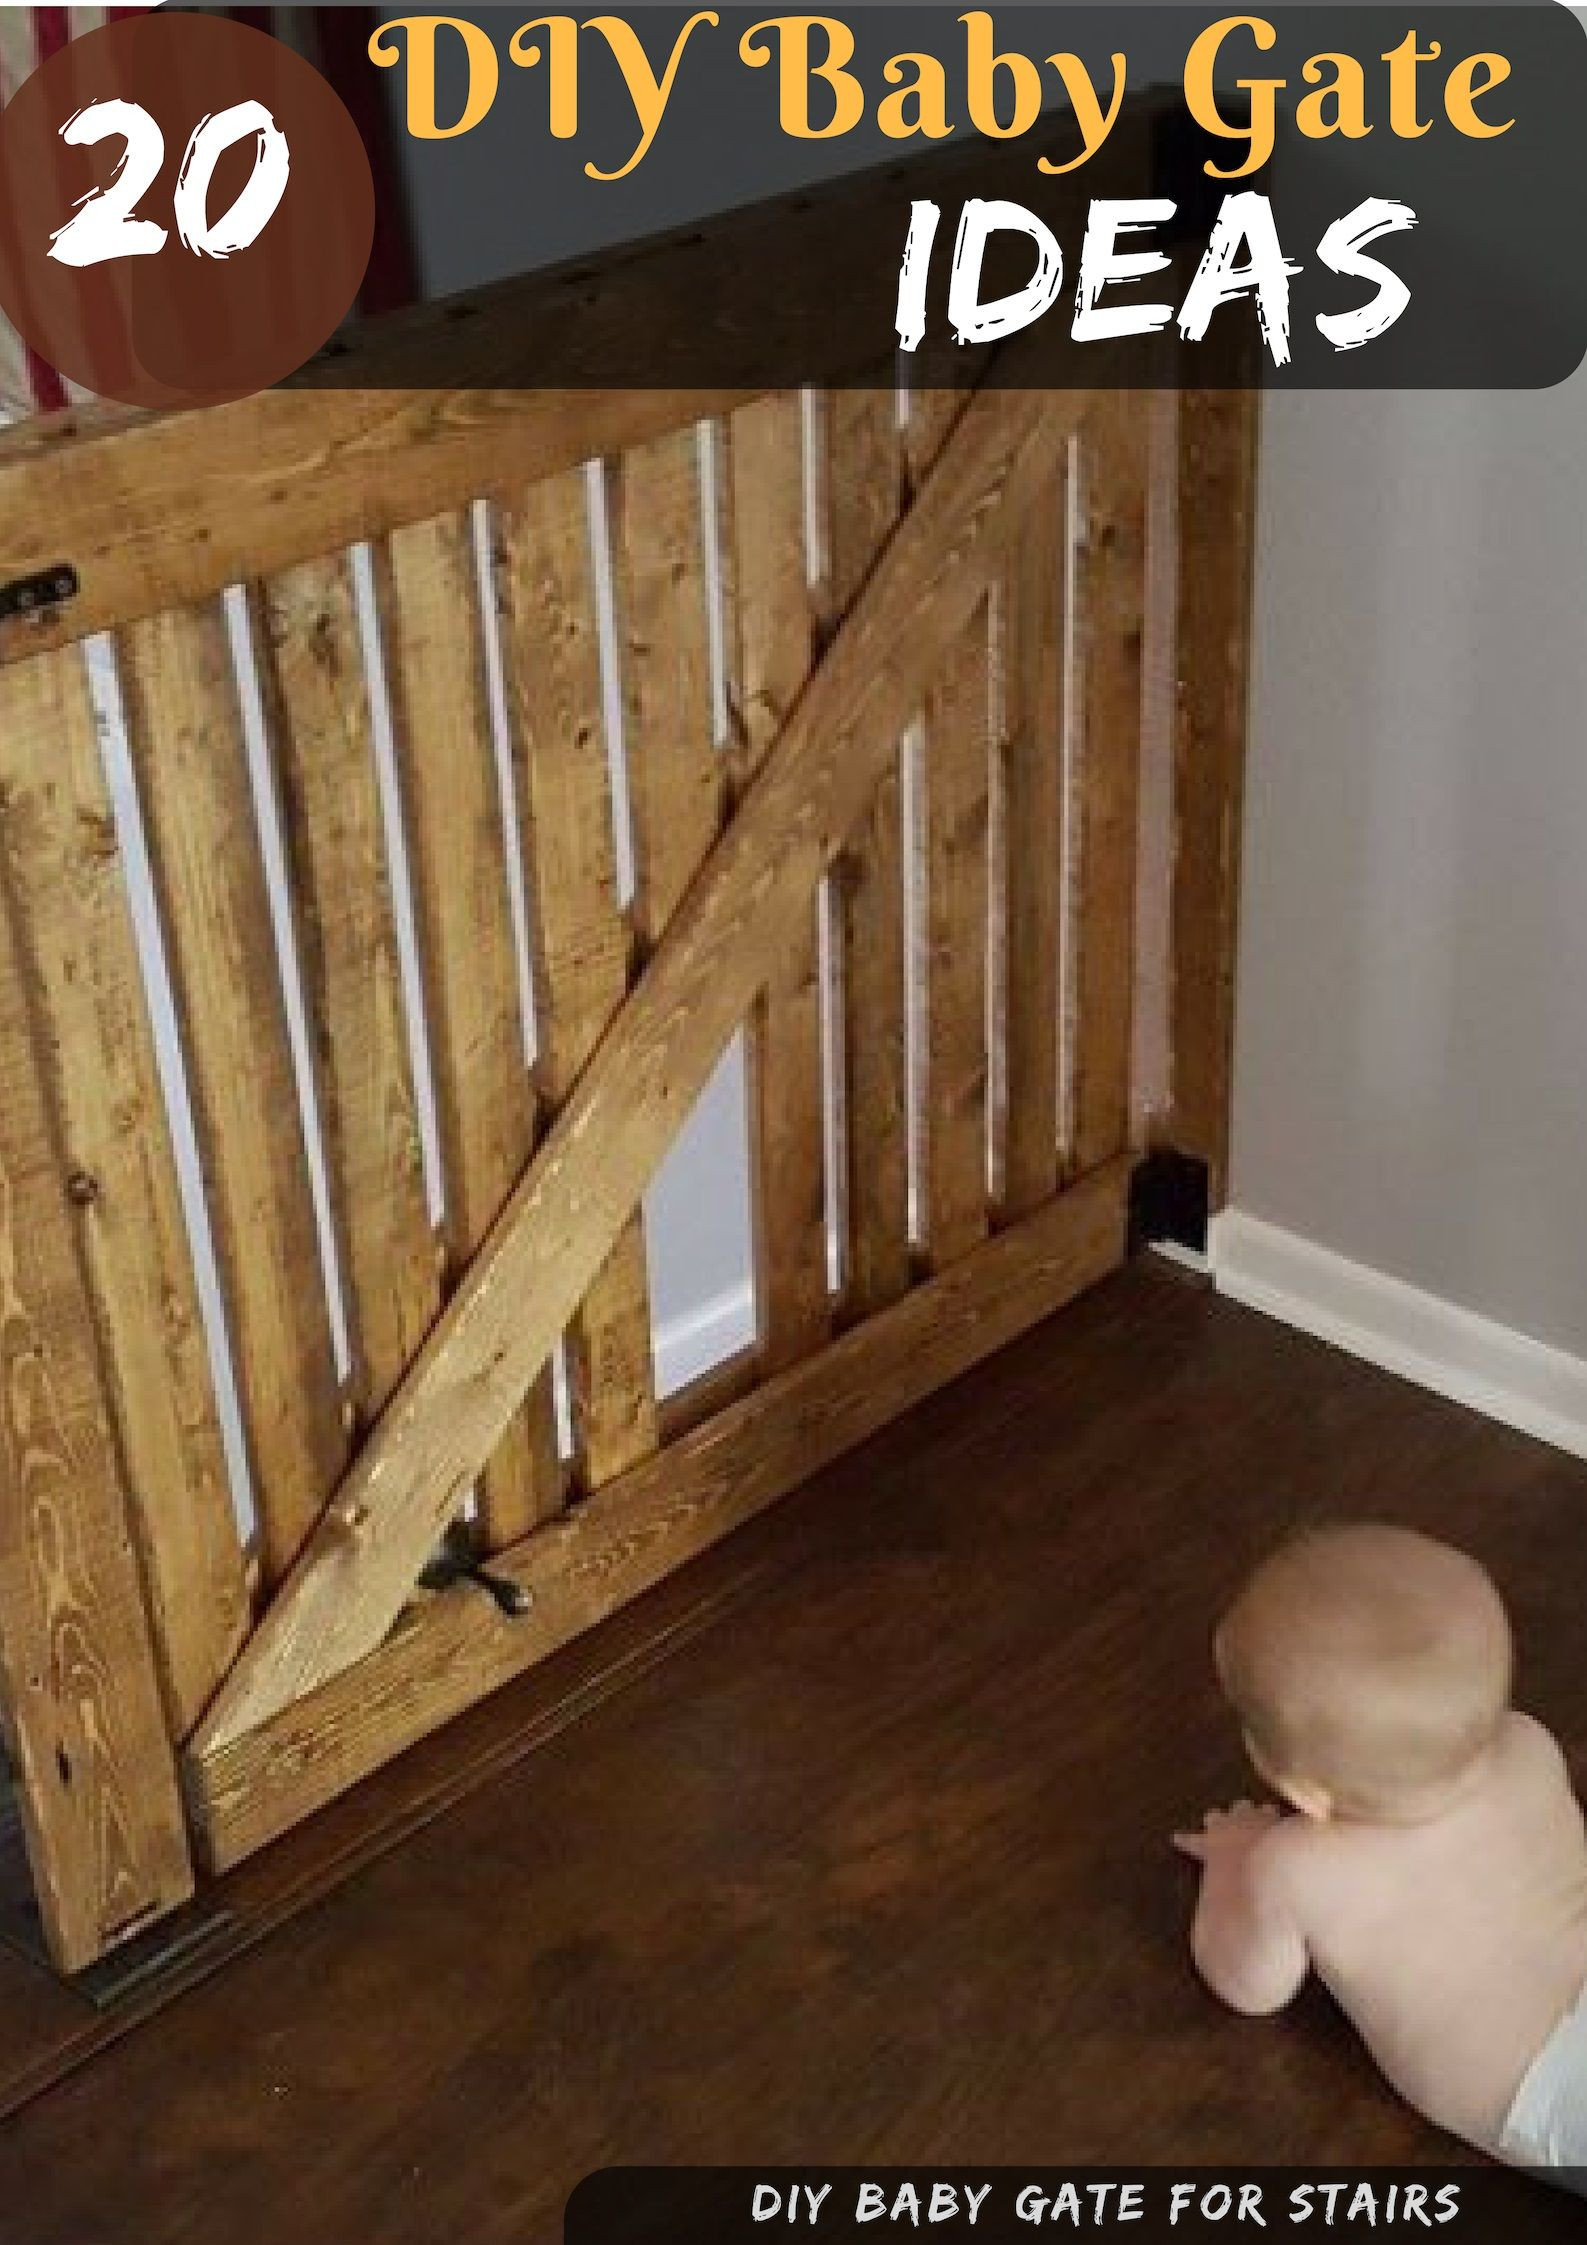 Diy Retractable Baby Gate
 DIY Baby Gate Ideas for Stairs and Hallway Sew fabric